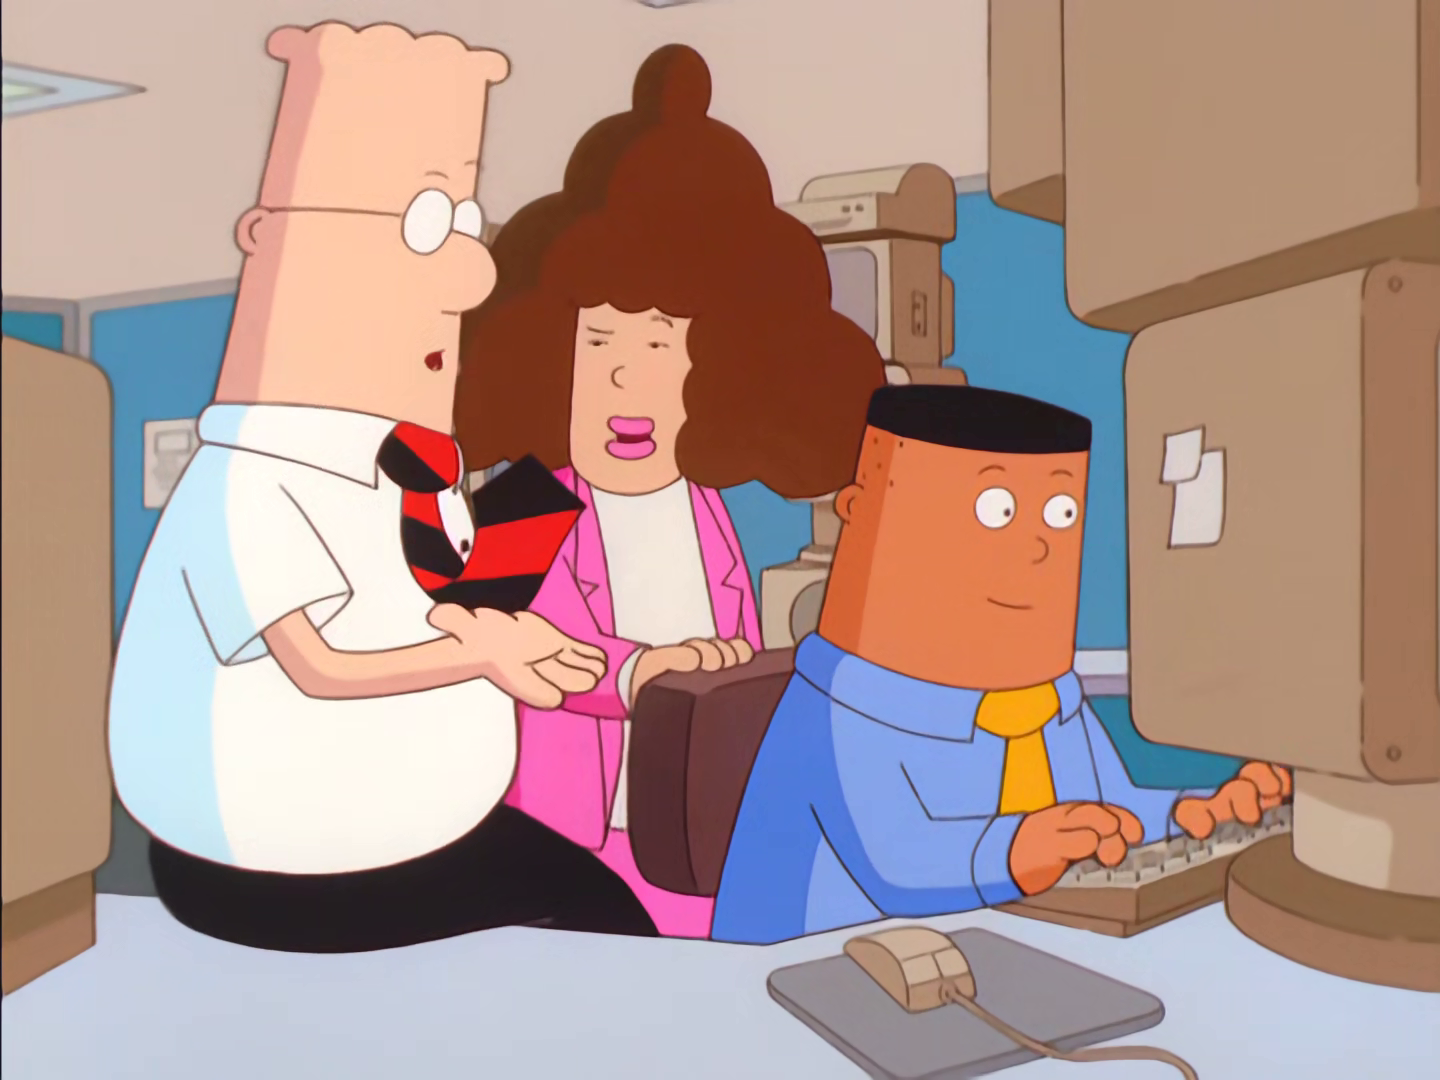 Dilbert (Daniel Stern), Alice (Kathy Griffin), and Asok (Tom Kenny) cook up a scheme to keep the newly-freed up cubicle all to themselves in Dilbert Season 2 Episode 12 "The Virtual Employee" (2000), UPN